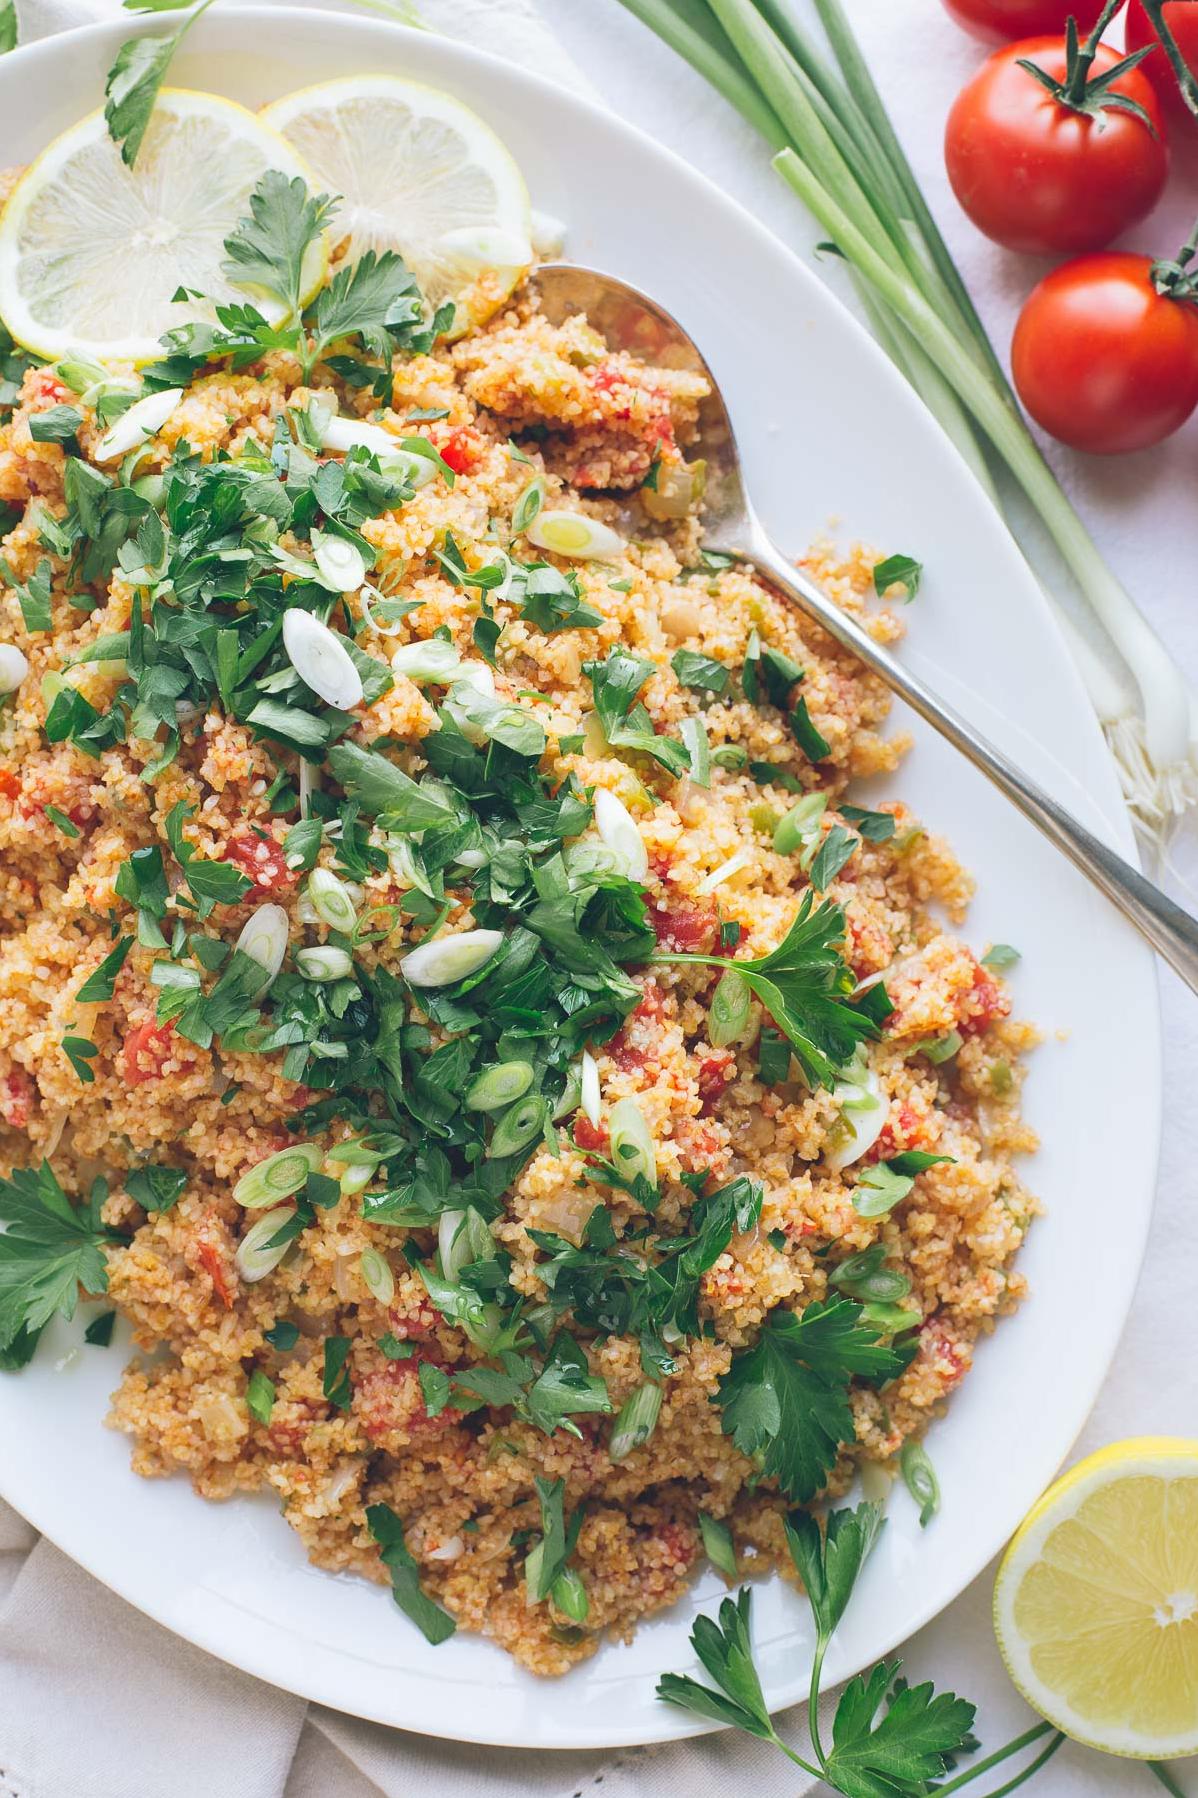  Bring some Armenian flavors to your table with this hearty bulgur side dish.